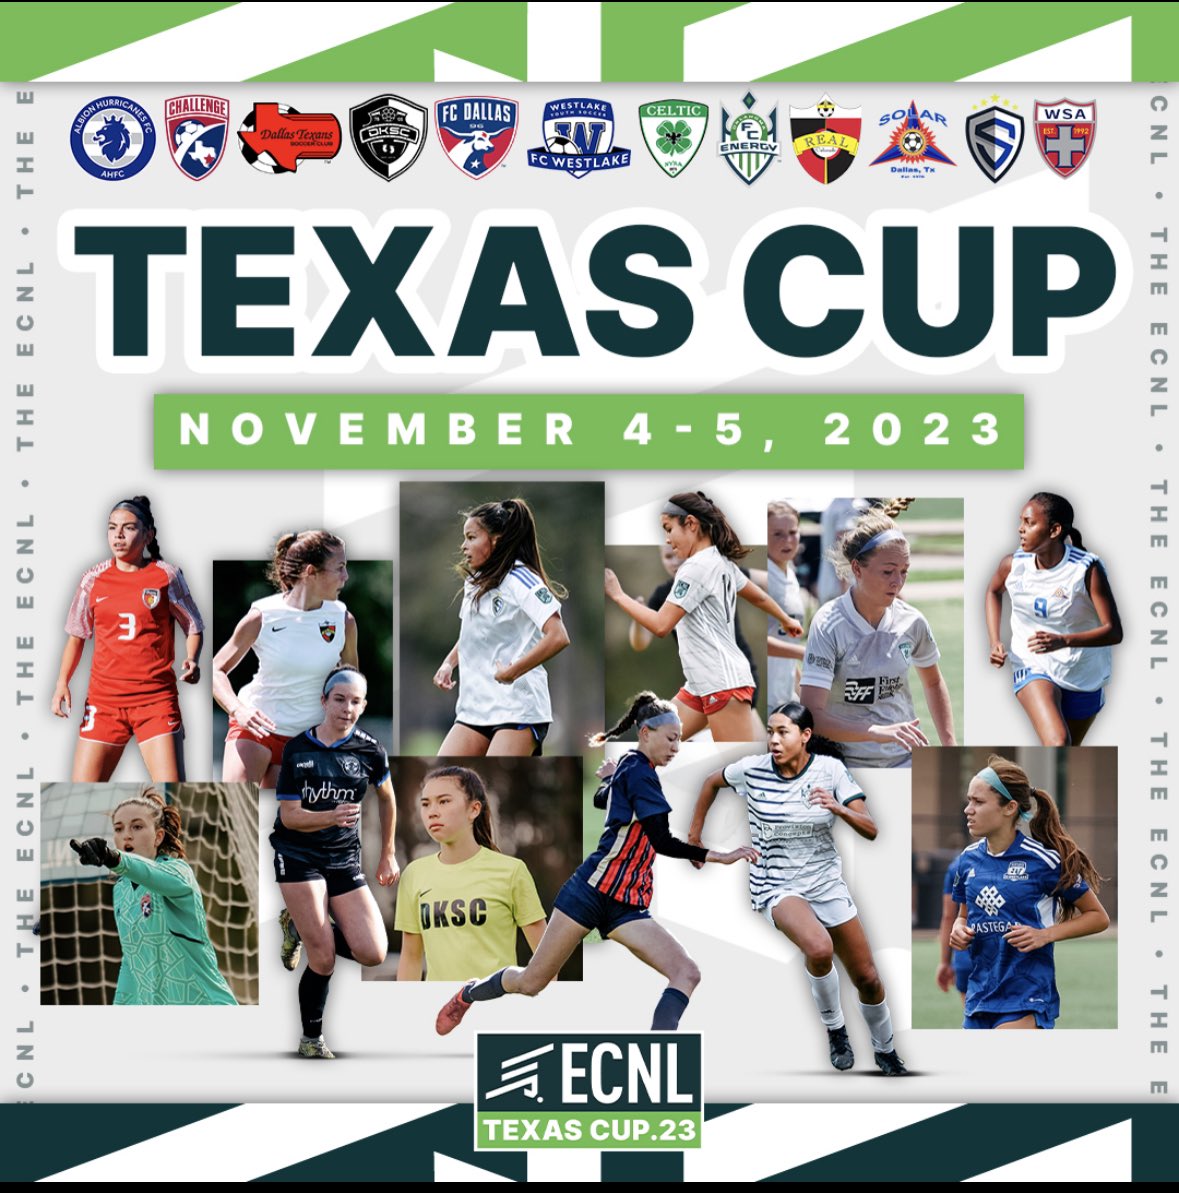 Exciting weekend ahead! First year ever Texas Cup! Good luck ladies bring home that Trophy! 🏆